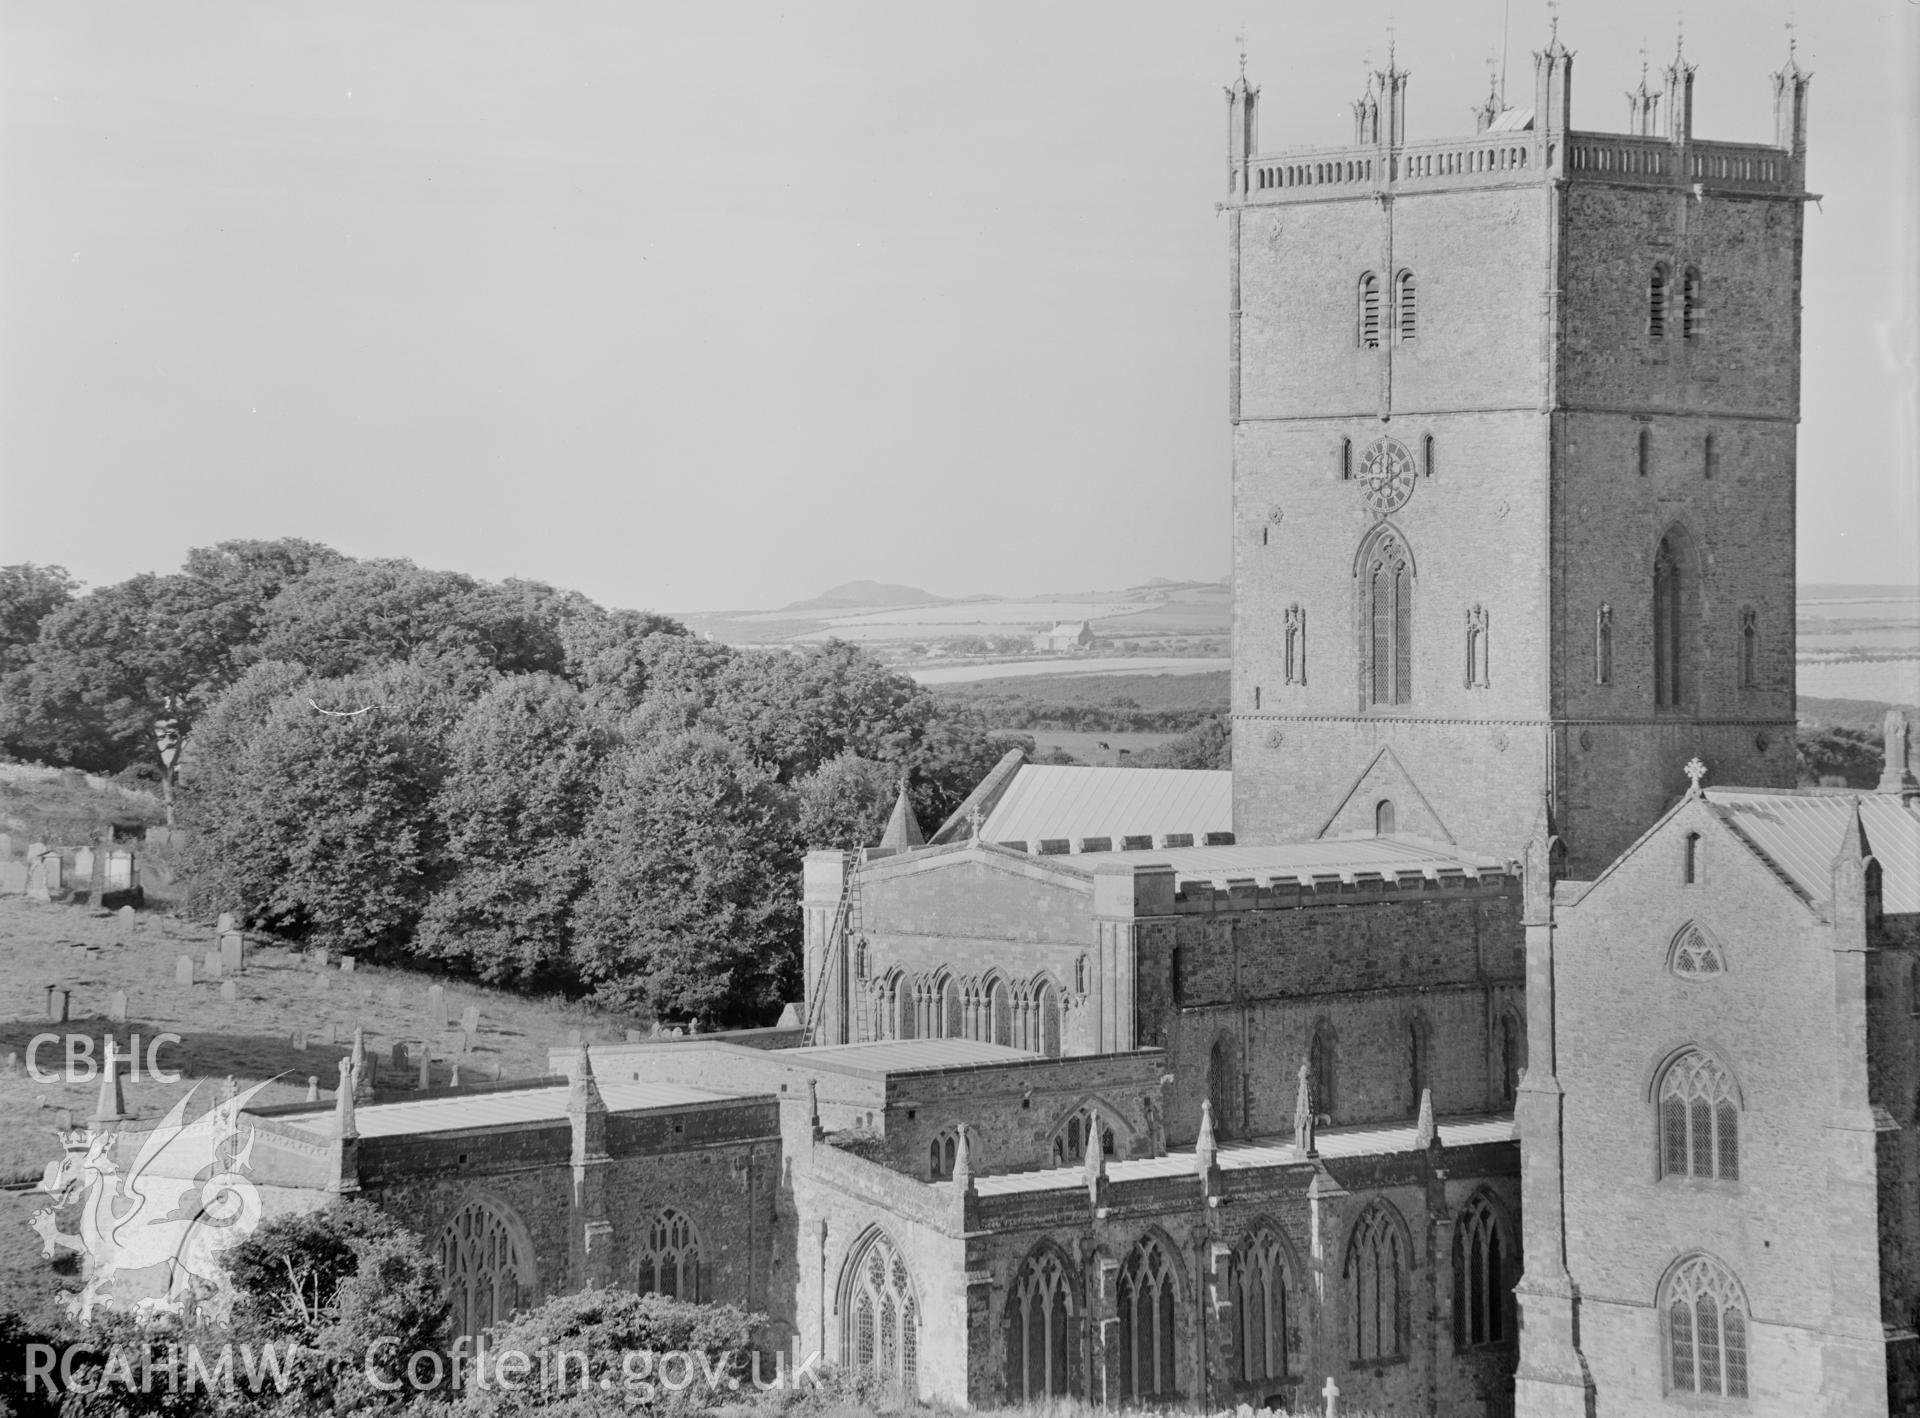 Digital copy of a black and white acetate negative showing general exterior view of St. David's Cathedral, taken by E.W. Lovegrove, July 1936.